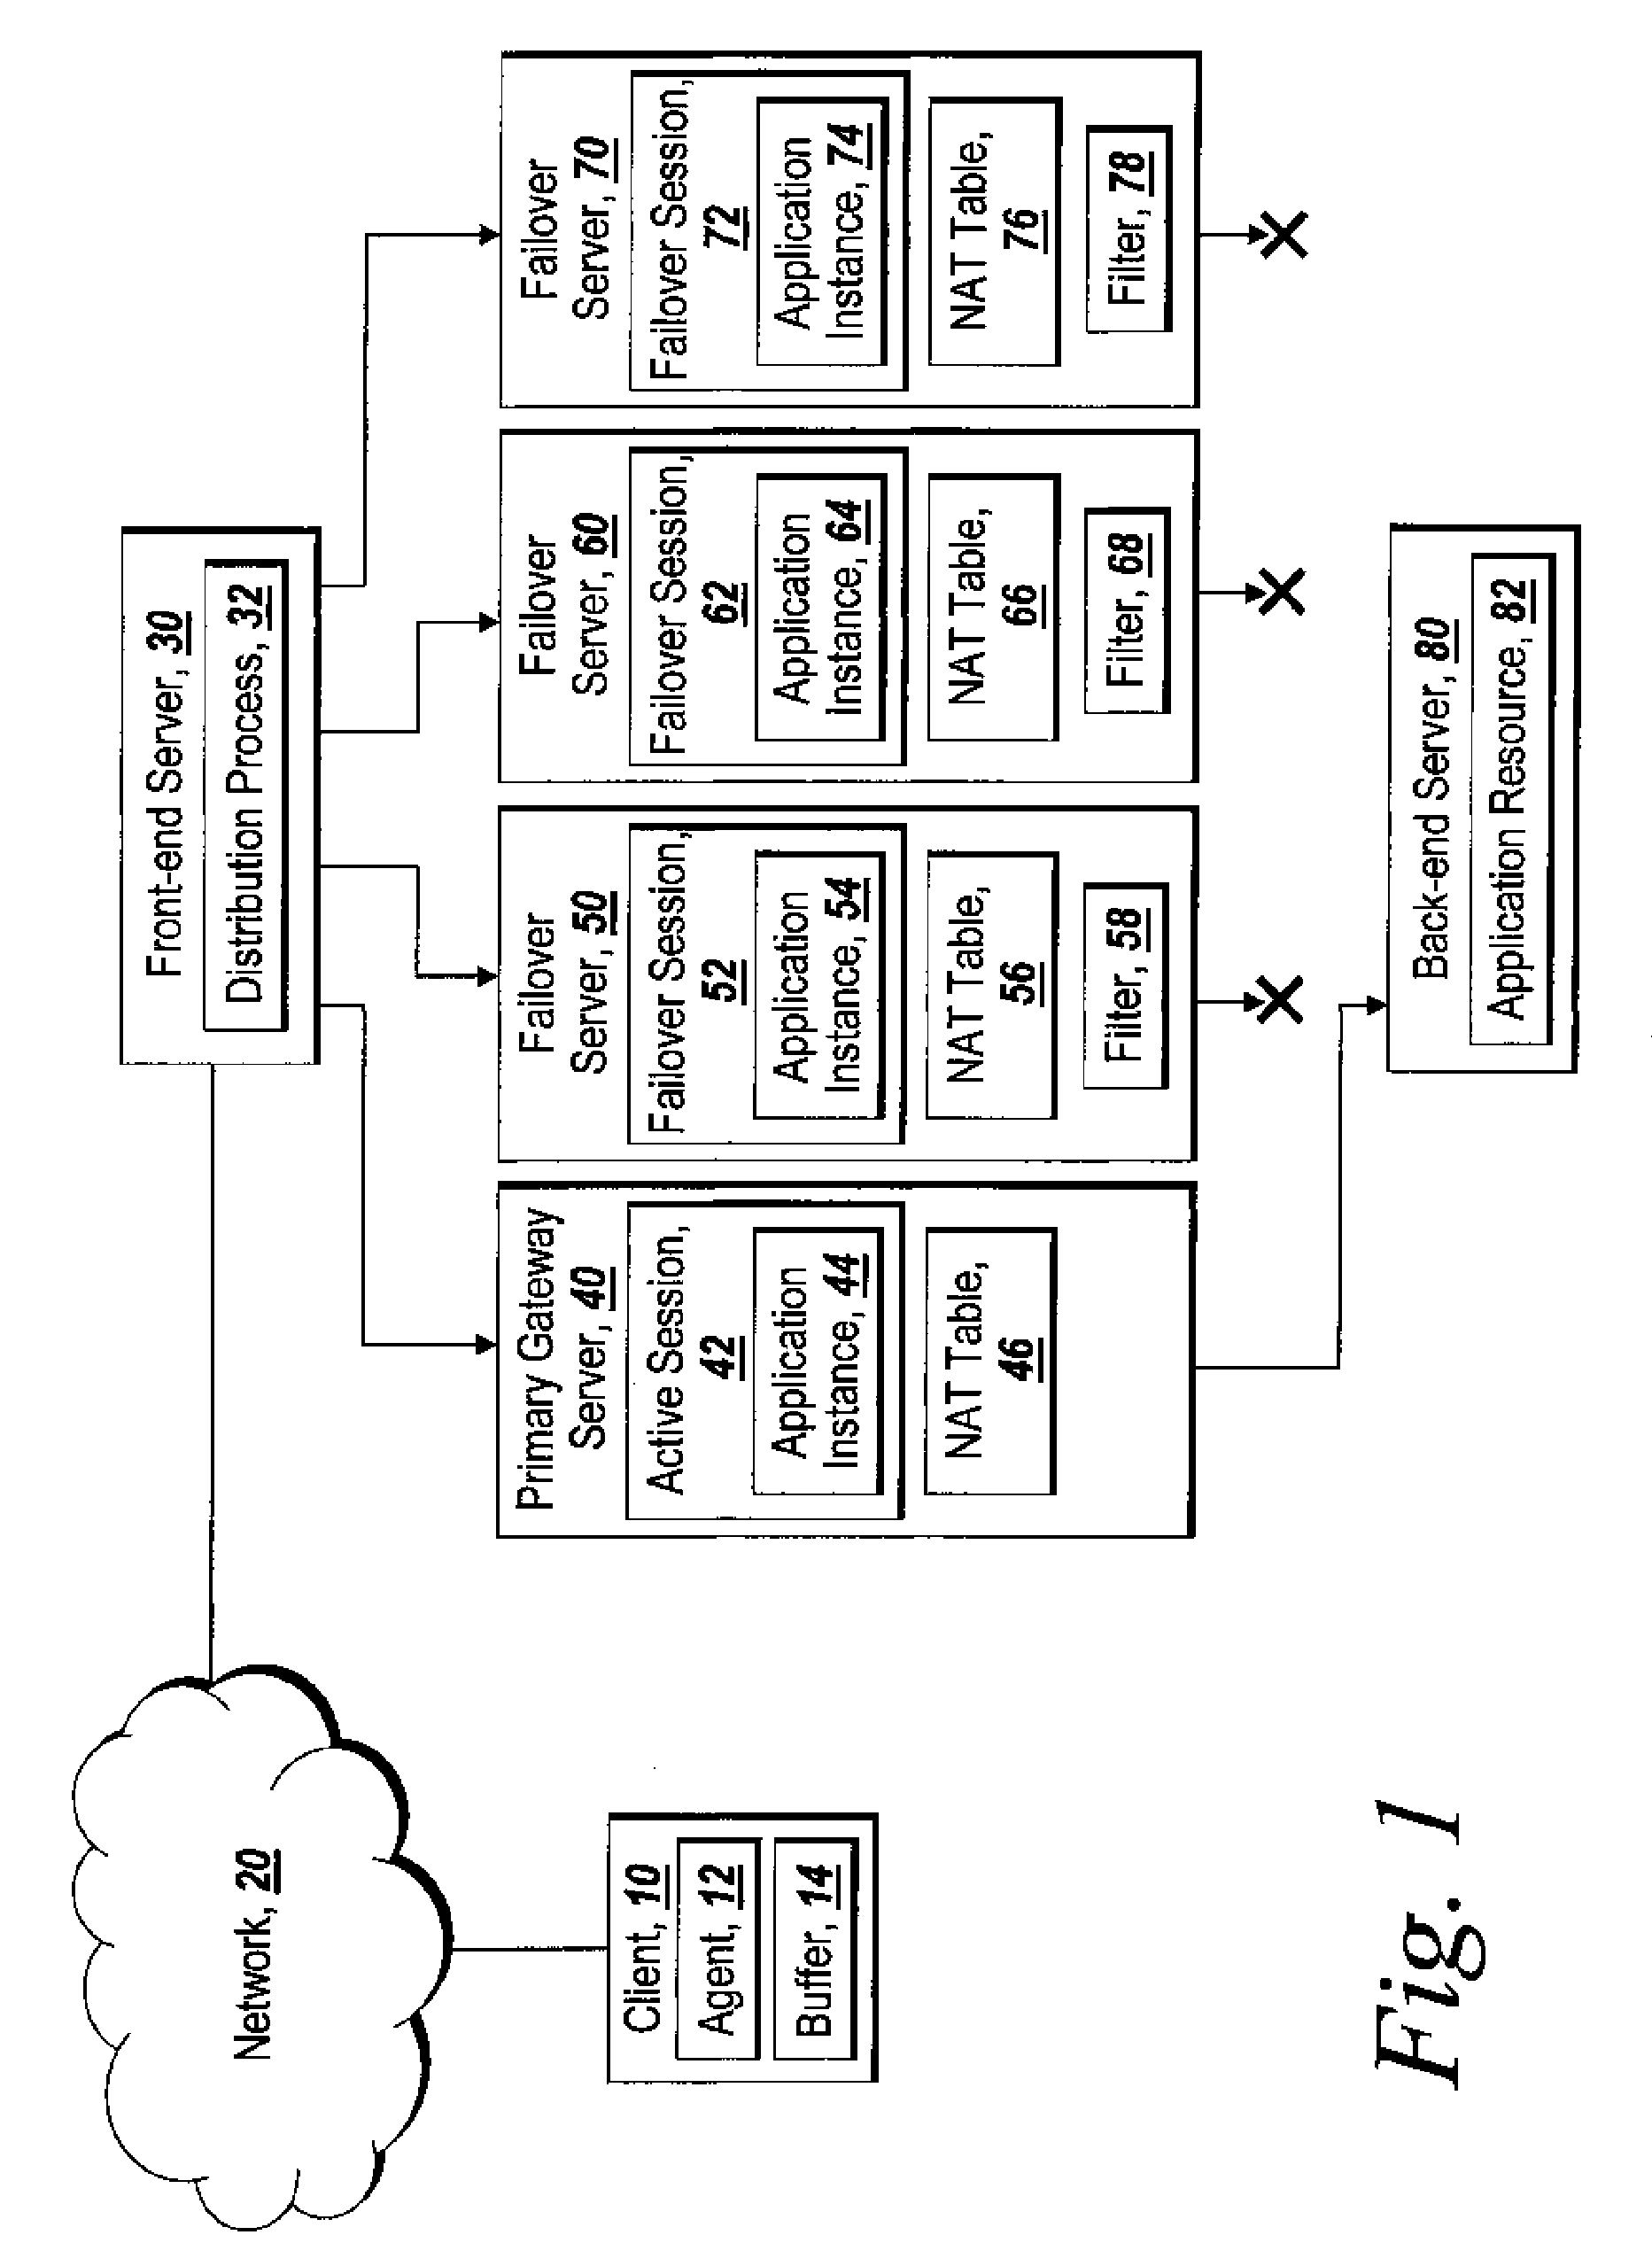 Method for maintaining transaction integrity across multiple remote access servers